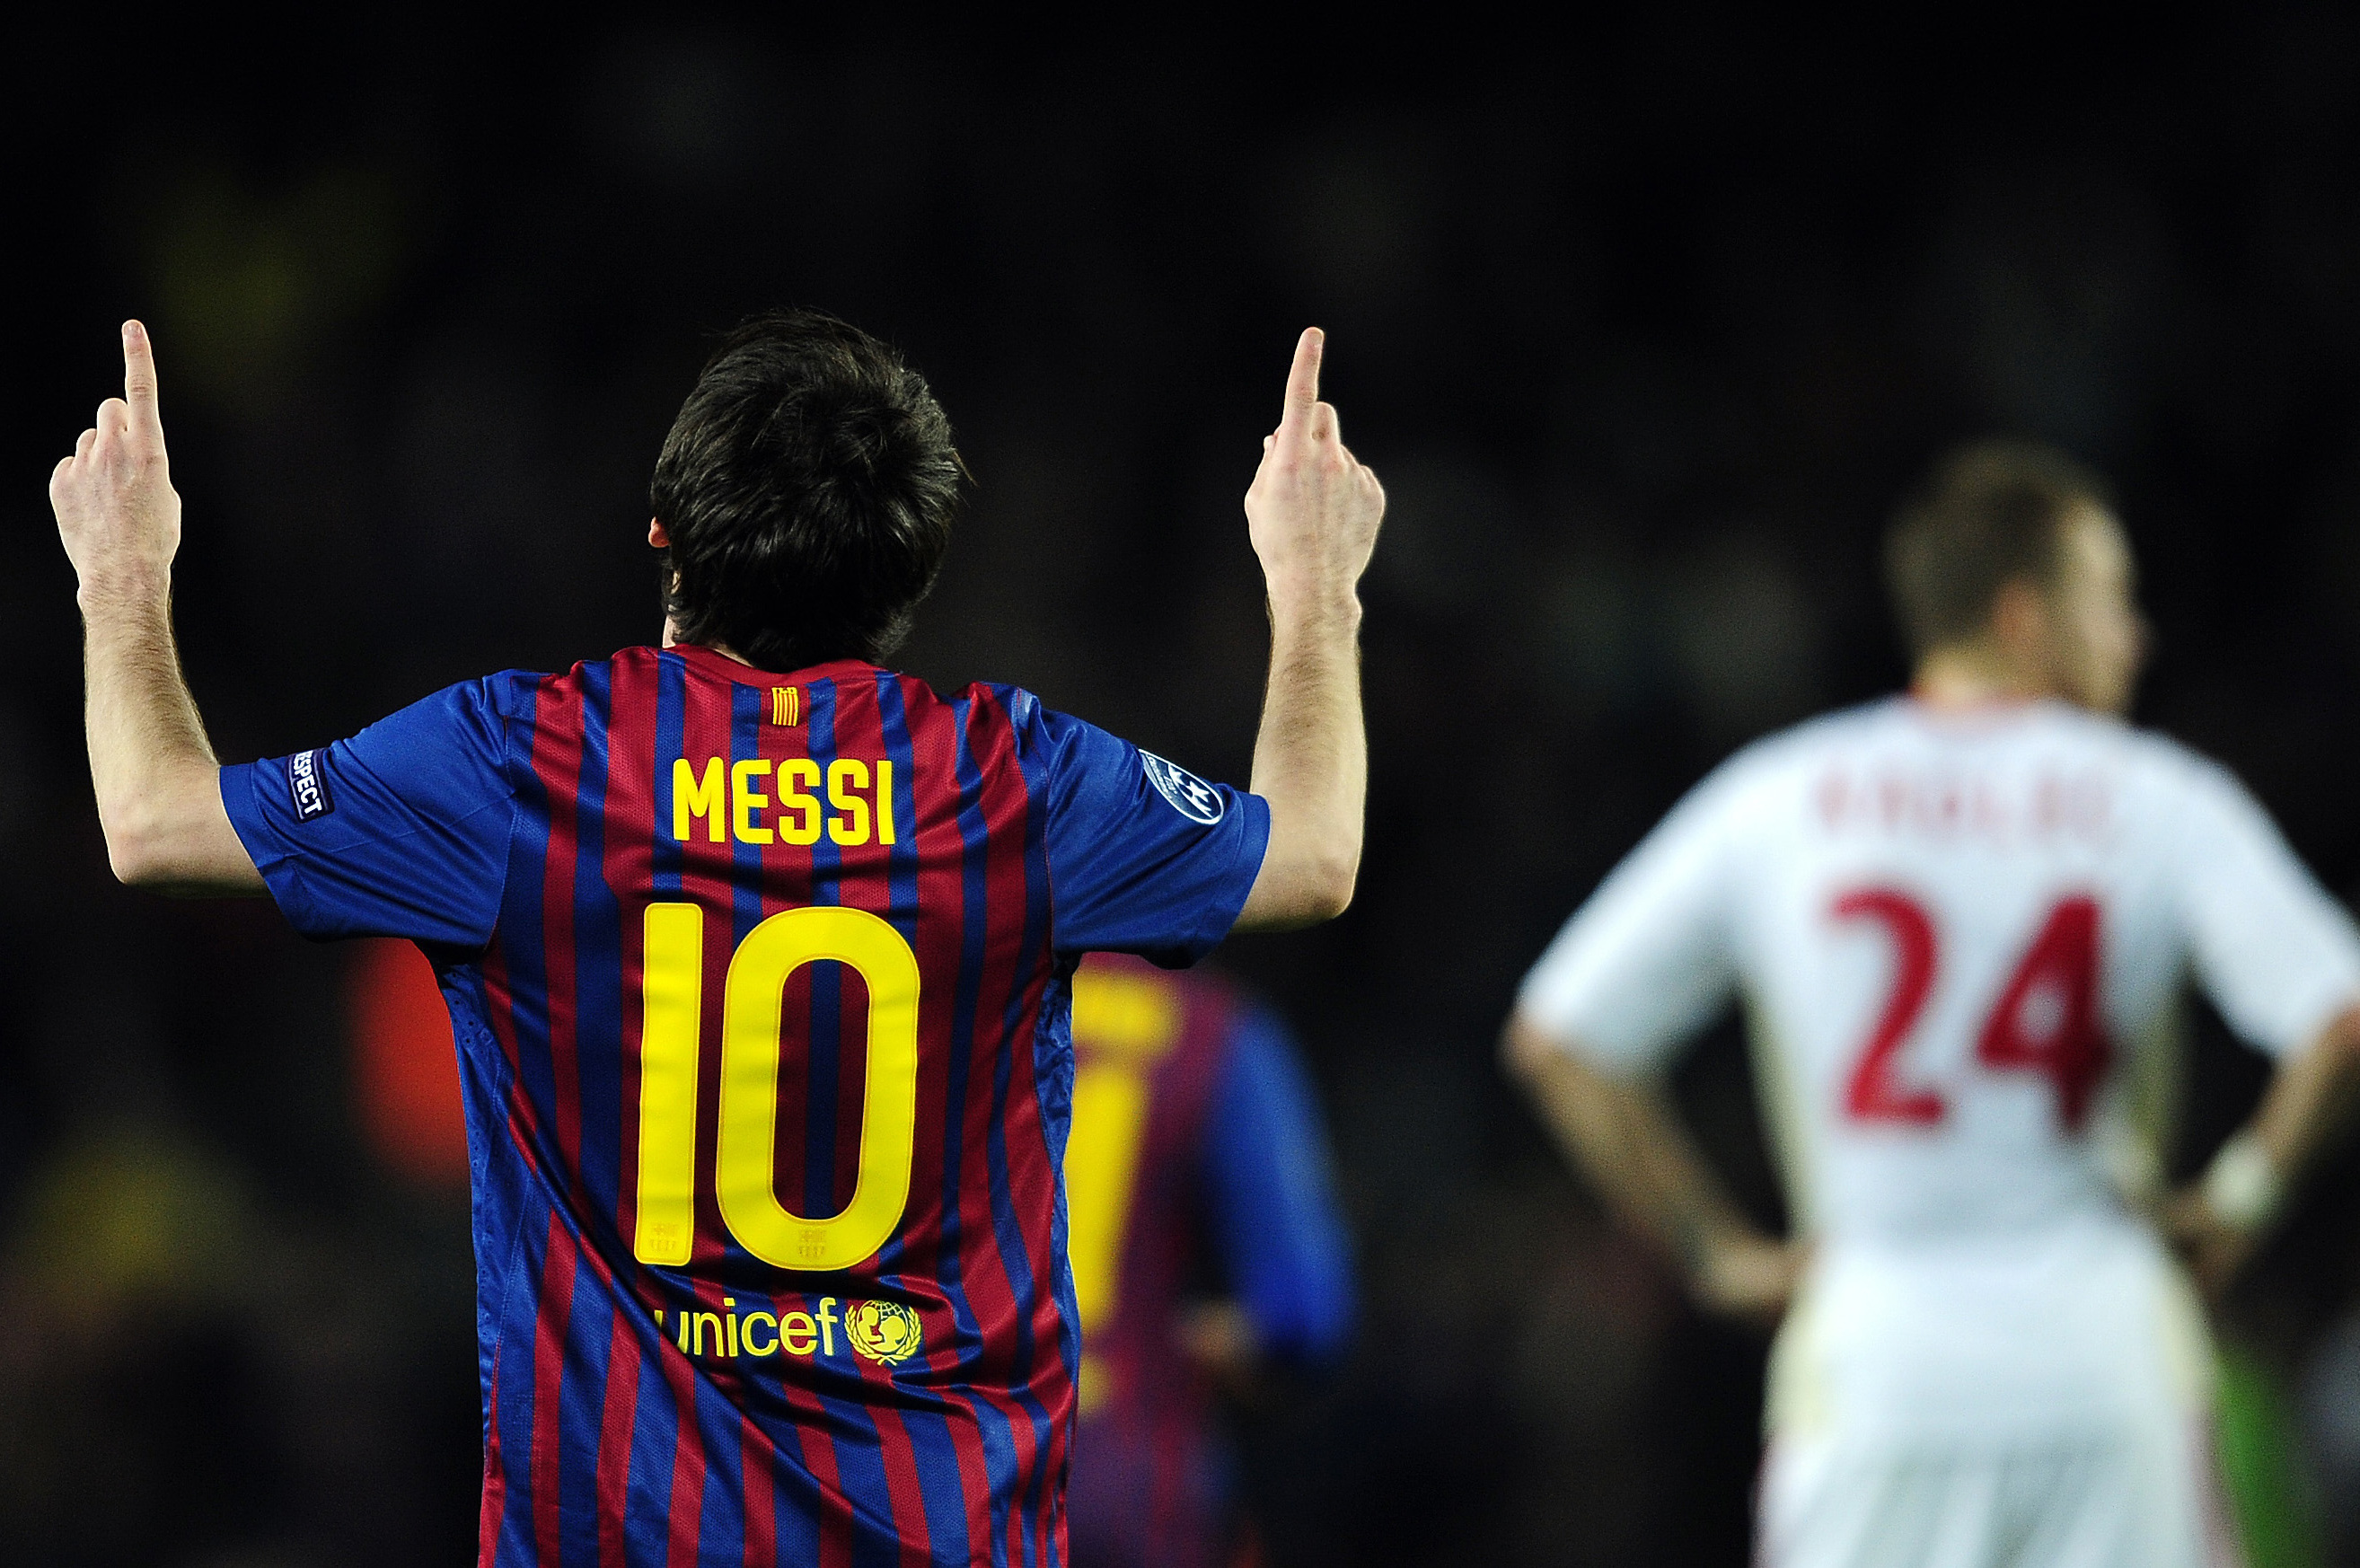 Genius Football - During the 2011/12 and 2012/13 season, Lionel Messi  scored 96 goals in 79 La Liga games and Cristiano Ronaldo scored 80 goals  in 72 La Liga games. 🇪🇸 A